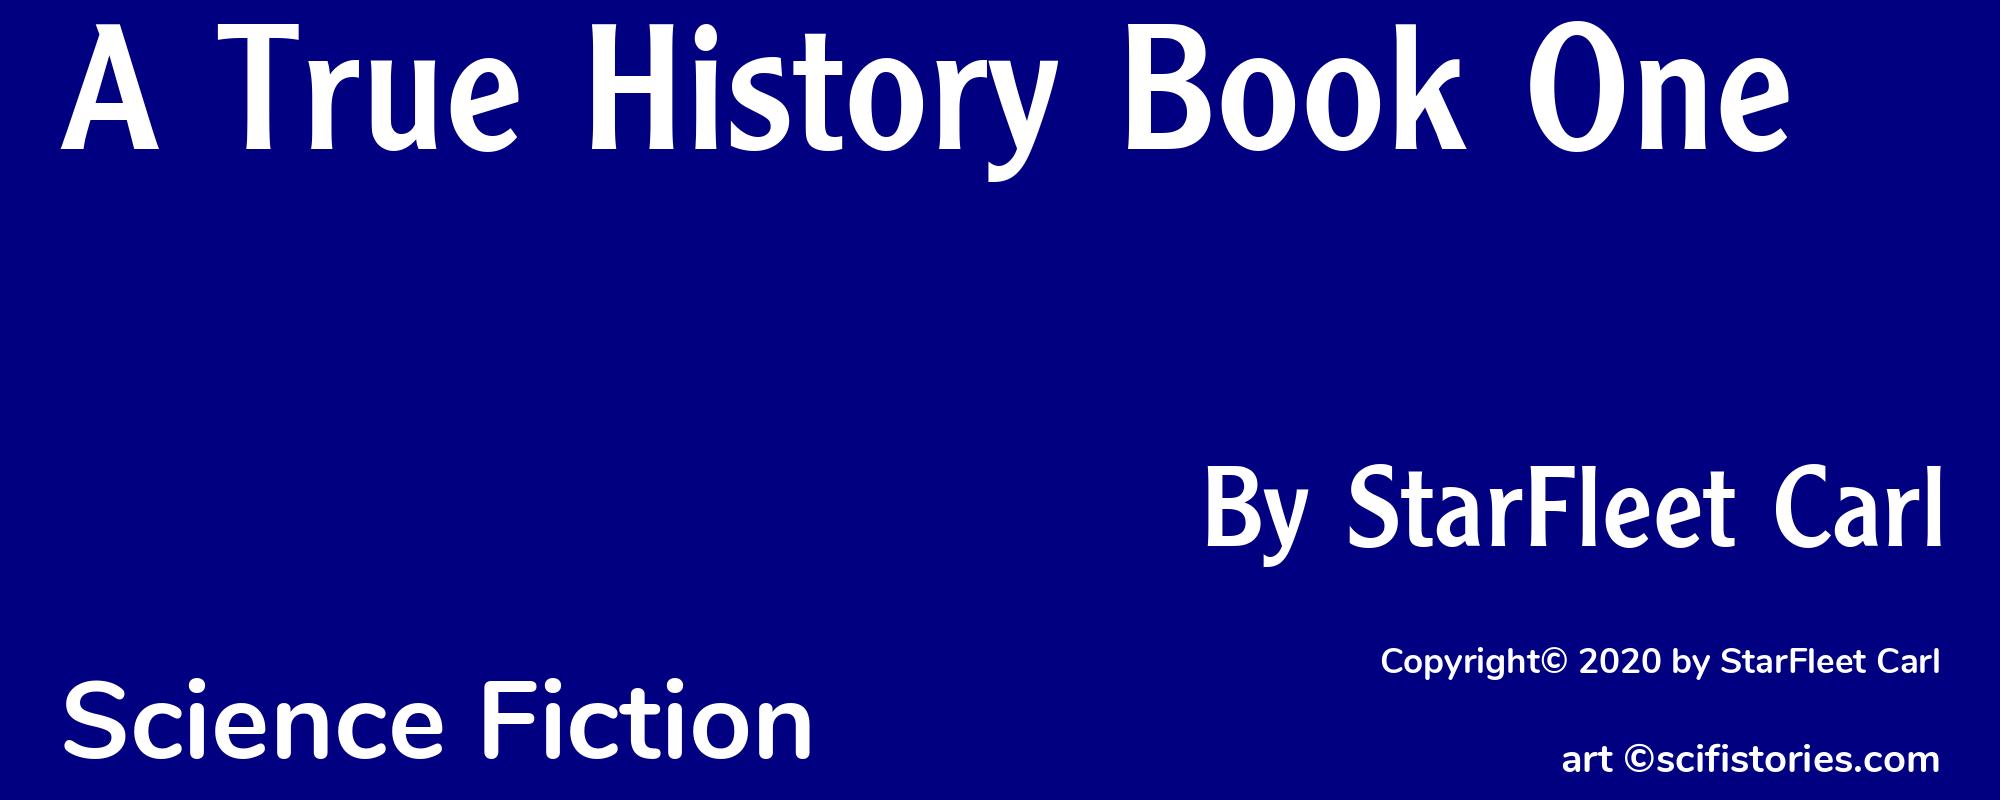 A True History Book One - Cover